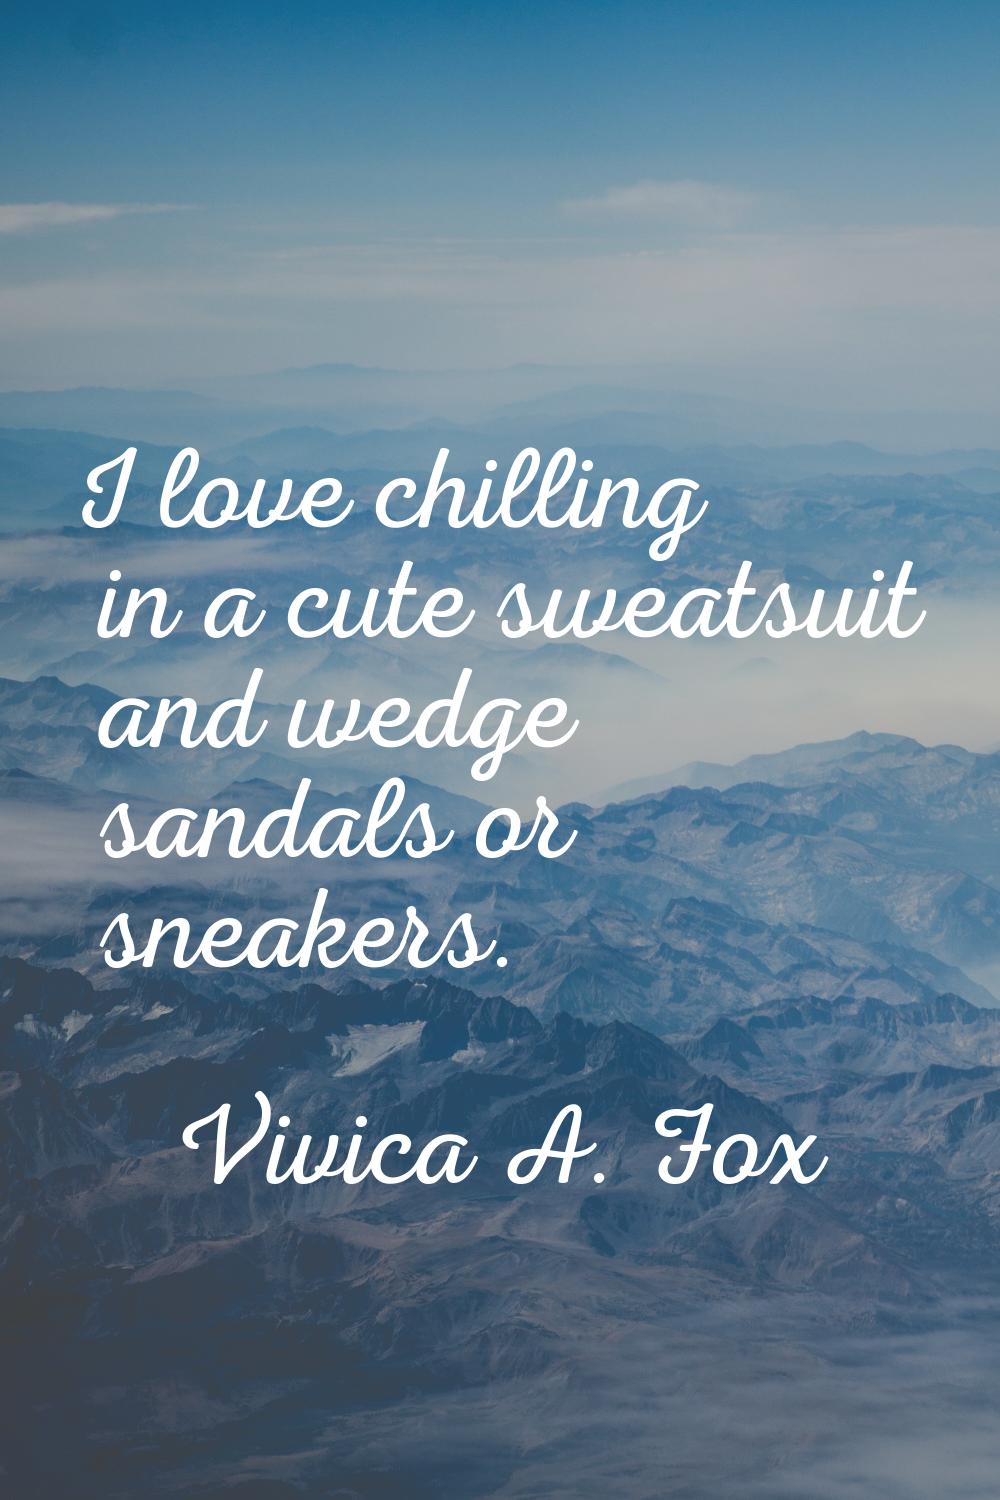 I love chilling in a cute sweatsuit and wedge sandals or sneakers.